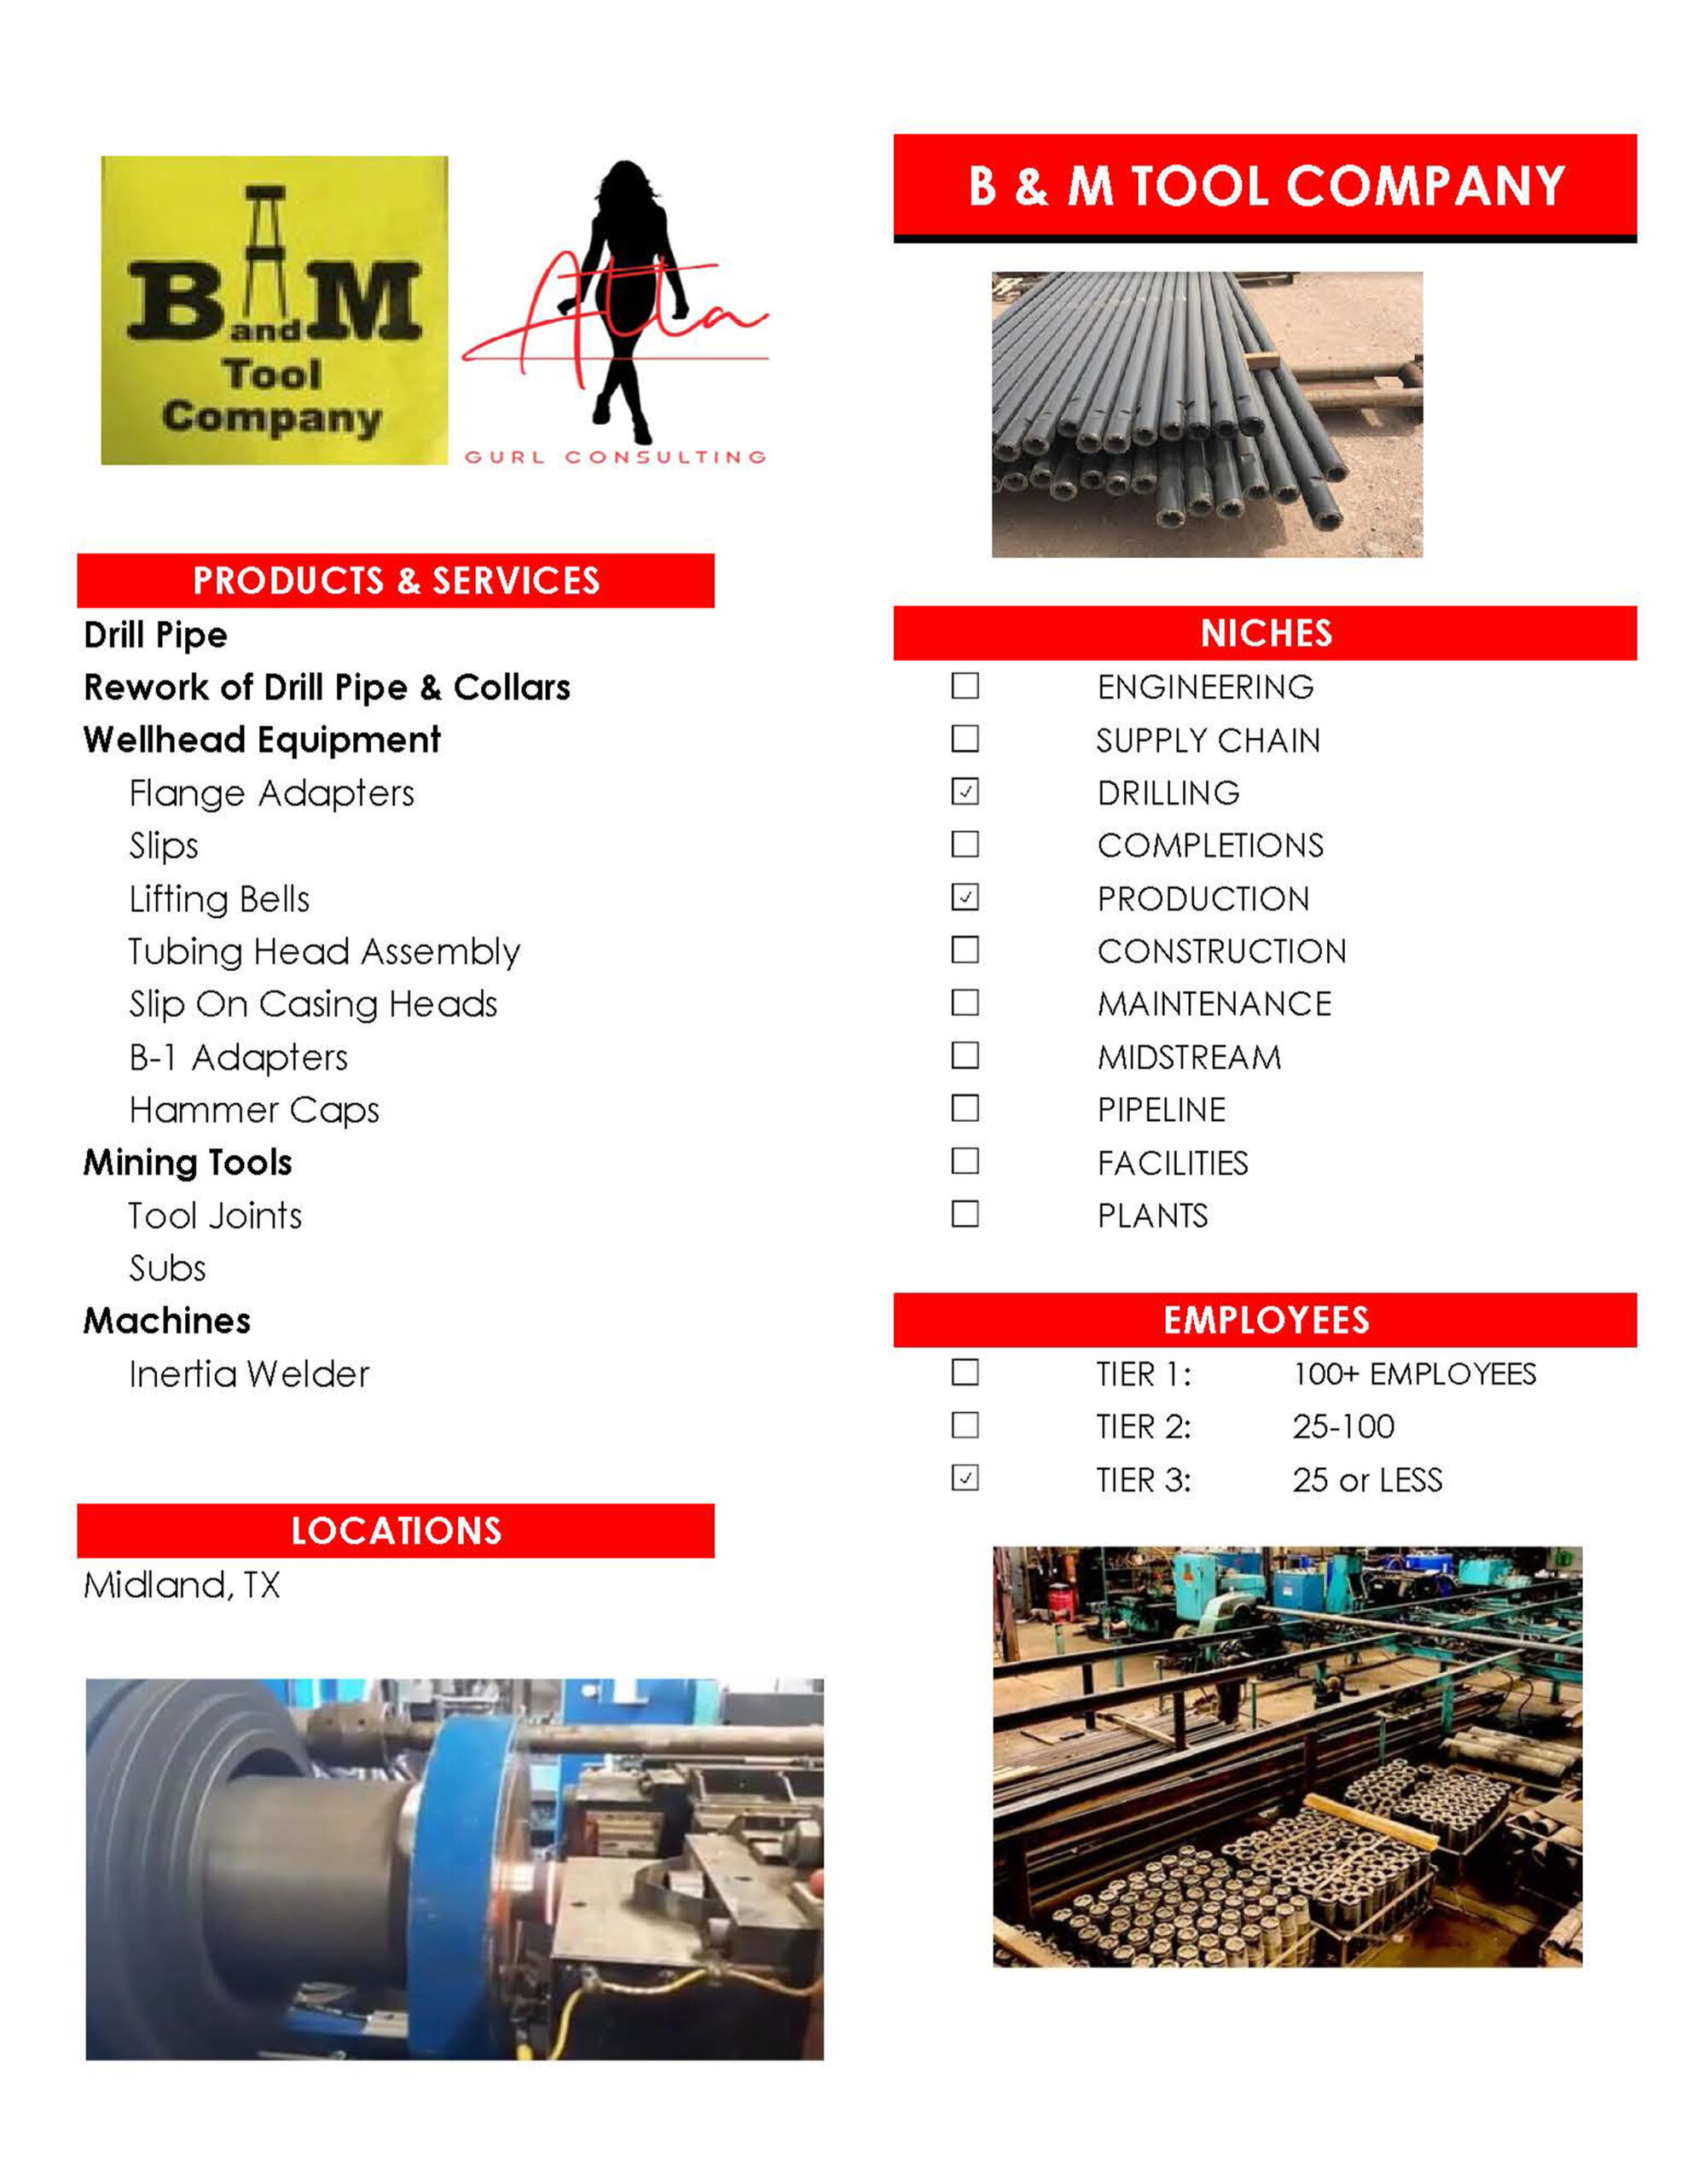 B and M Tool Company - Drill Pipe Rework of Drill Pipe & Collars Wellhead Equipment Flange Adapters Slips Lifting Bells Tubing Head Assembly Slip On Casing Heads B-1 Adapters Hammer Caps Mining Tools Machines Inertia Welder